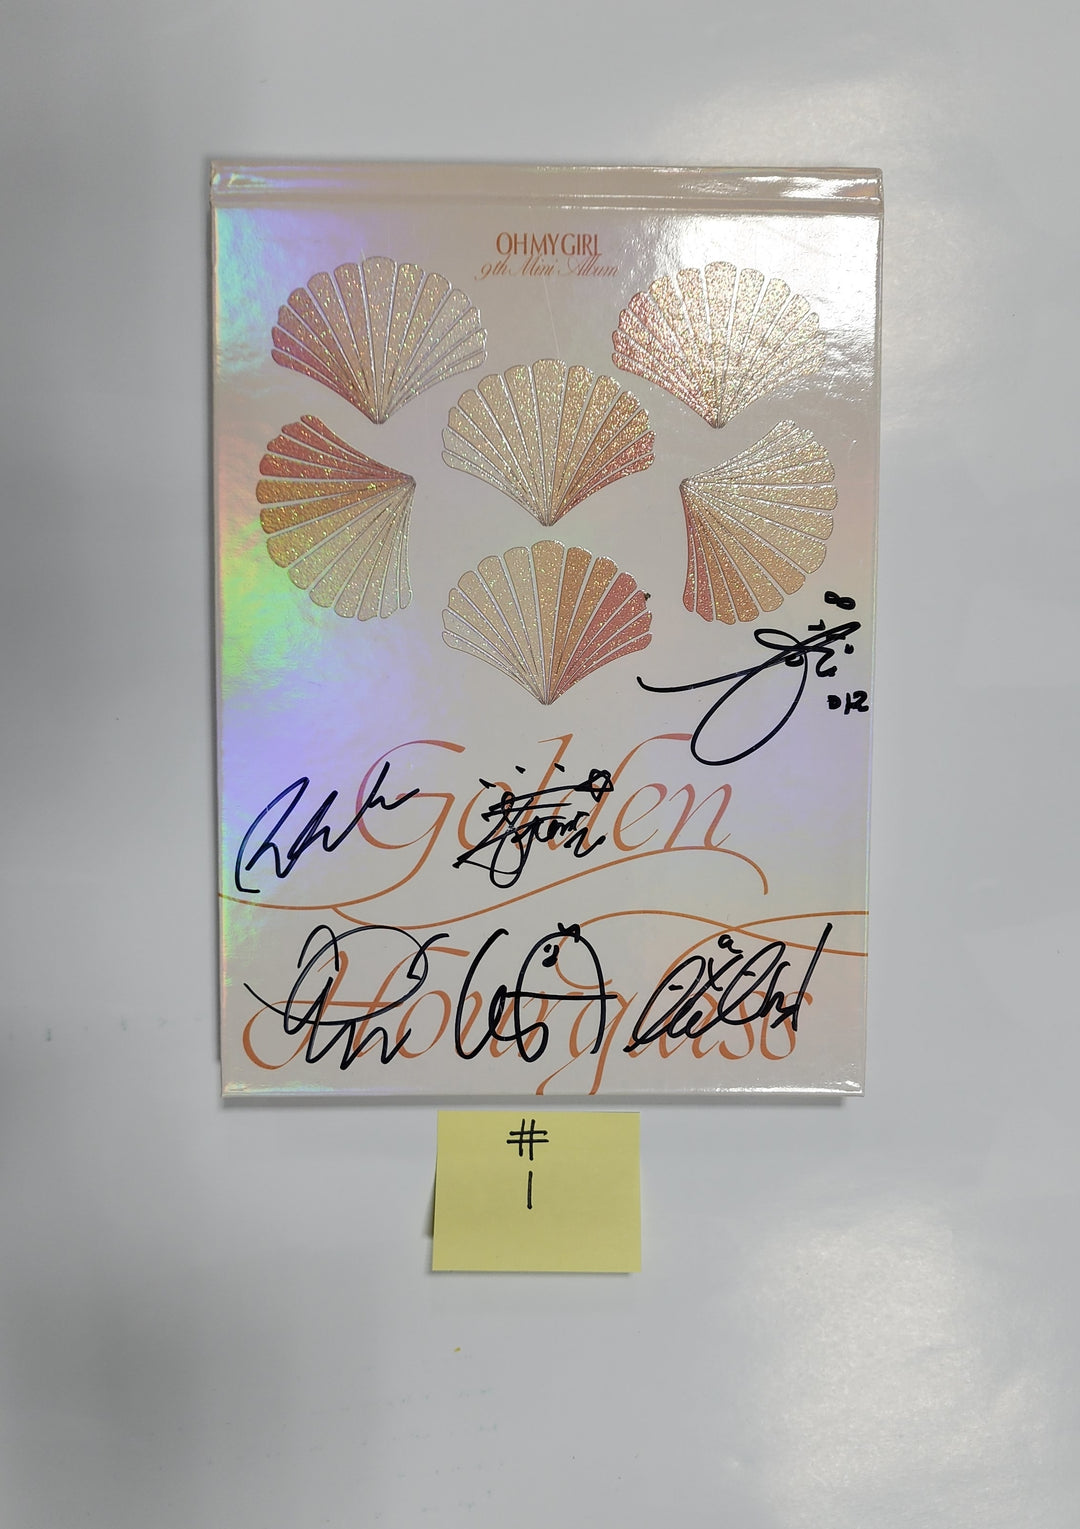 Oh My Girl "Golden Hourglass" - Hand Autographed(Signed) Promo Album